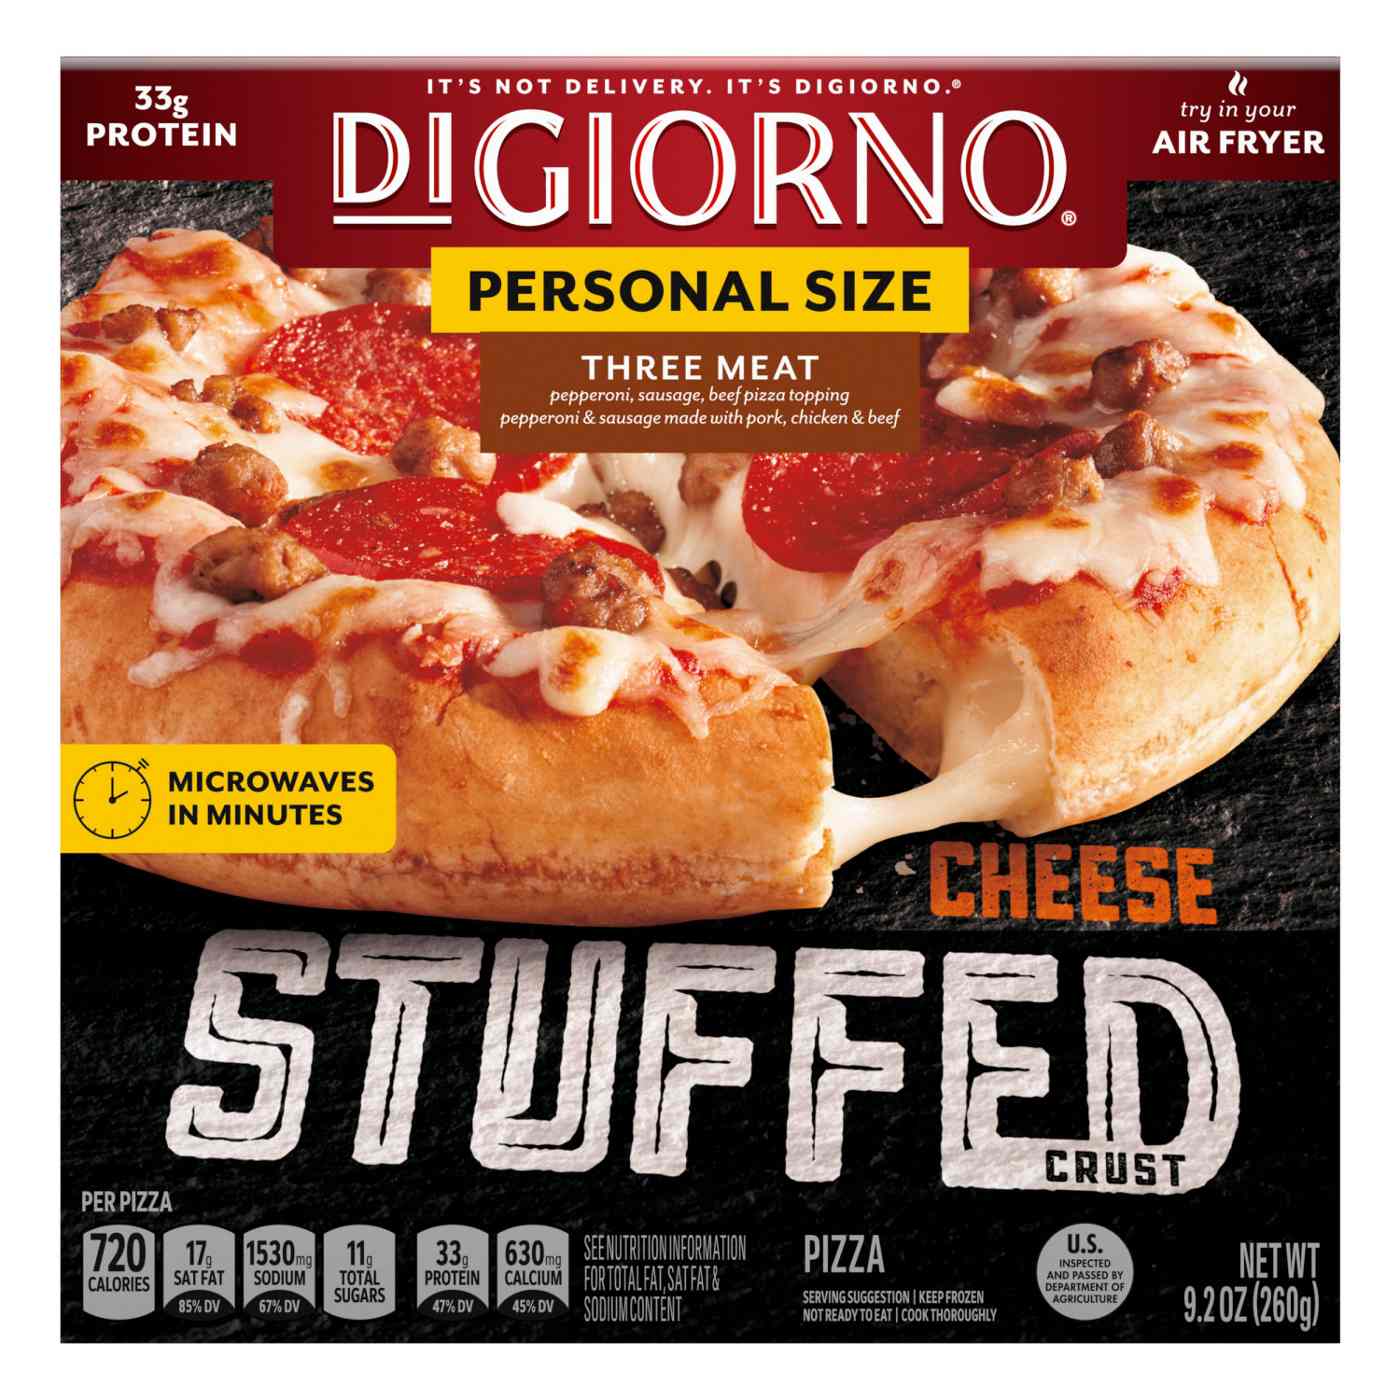 DiGiorno Cheese Stuffed Crust Personal Size Pizza - Three Meat; image 1 of 3